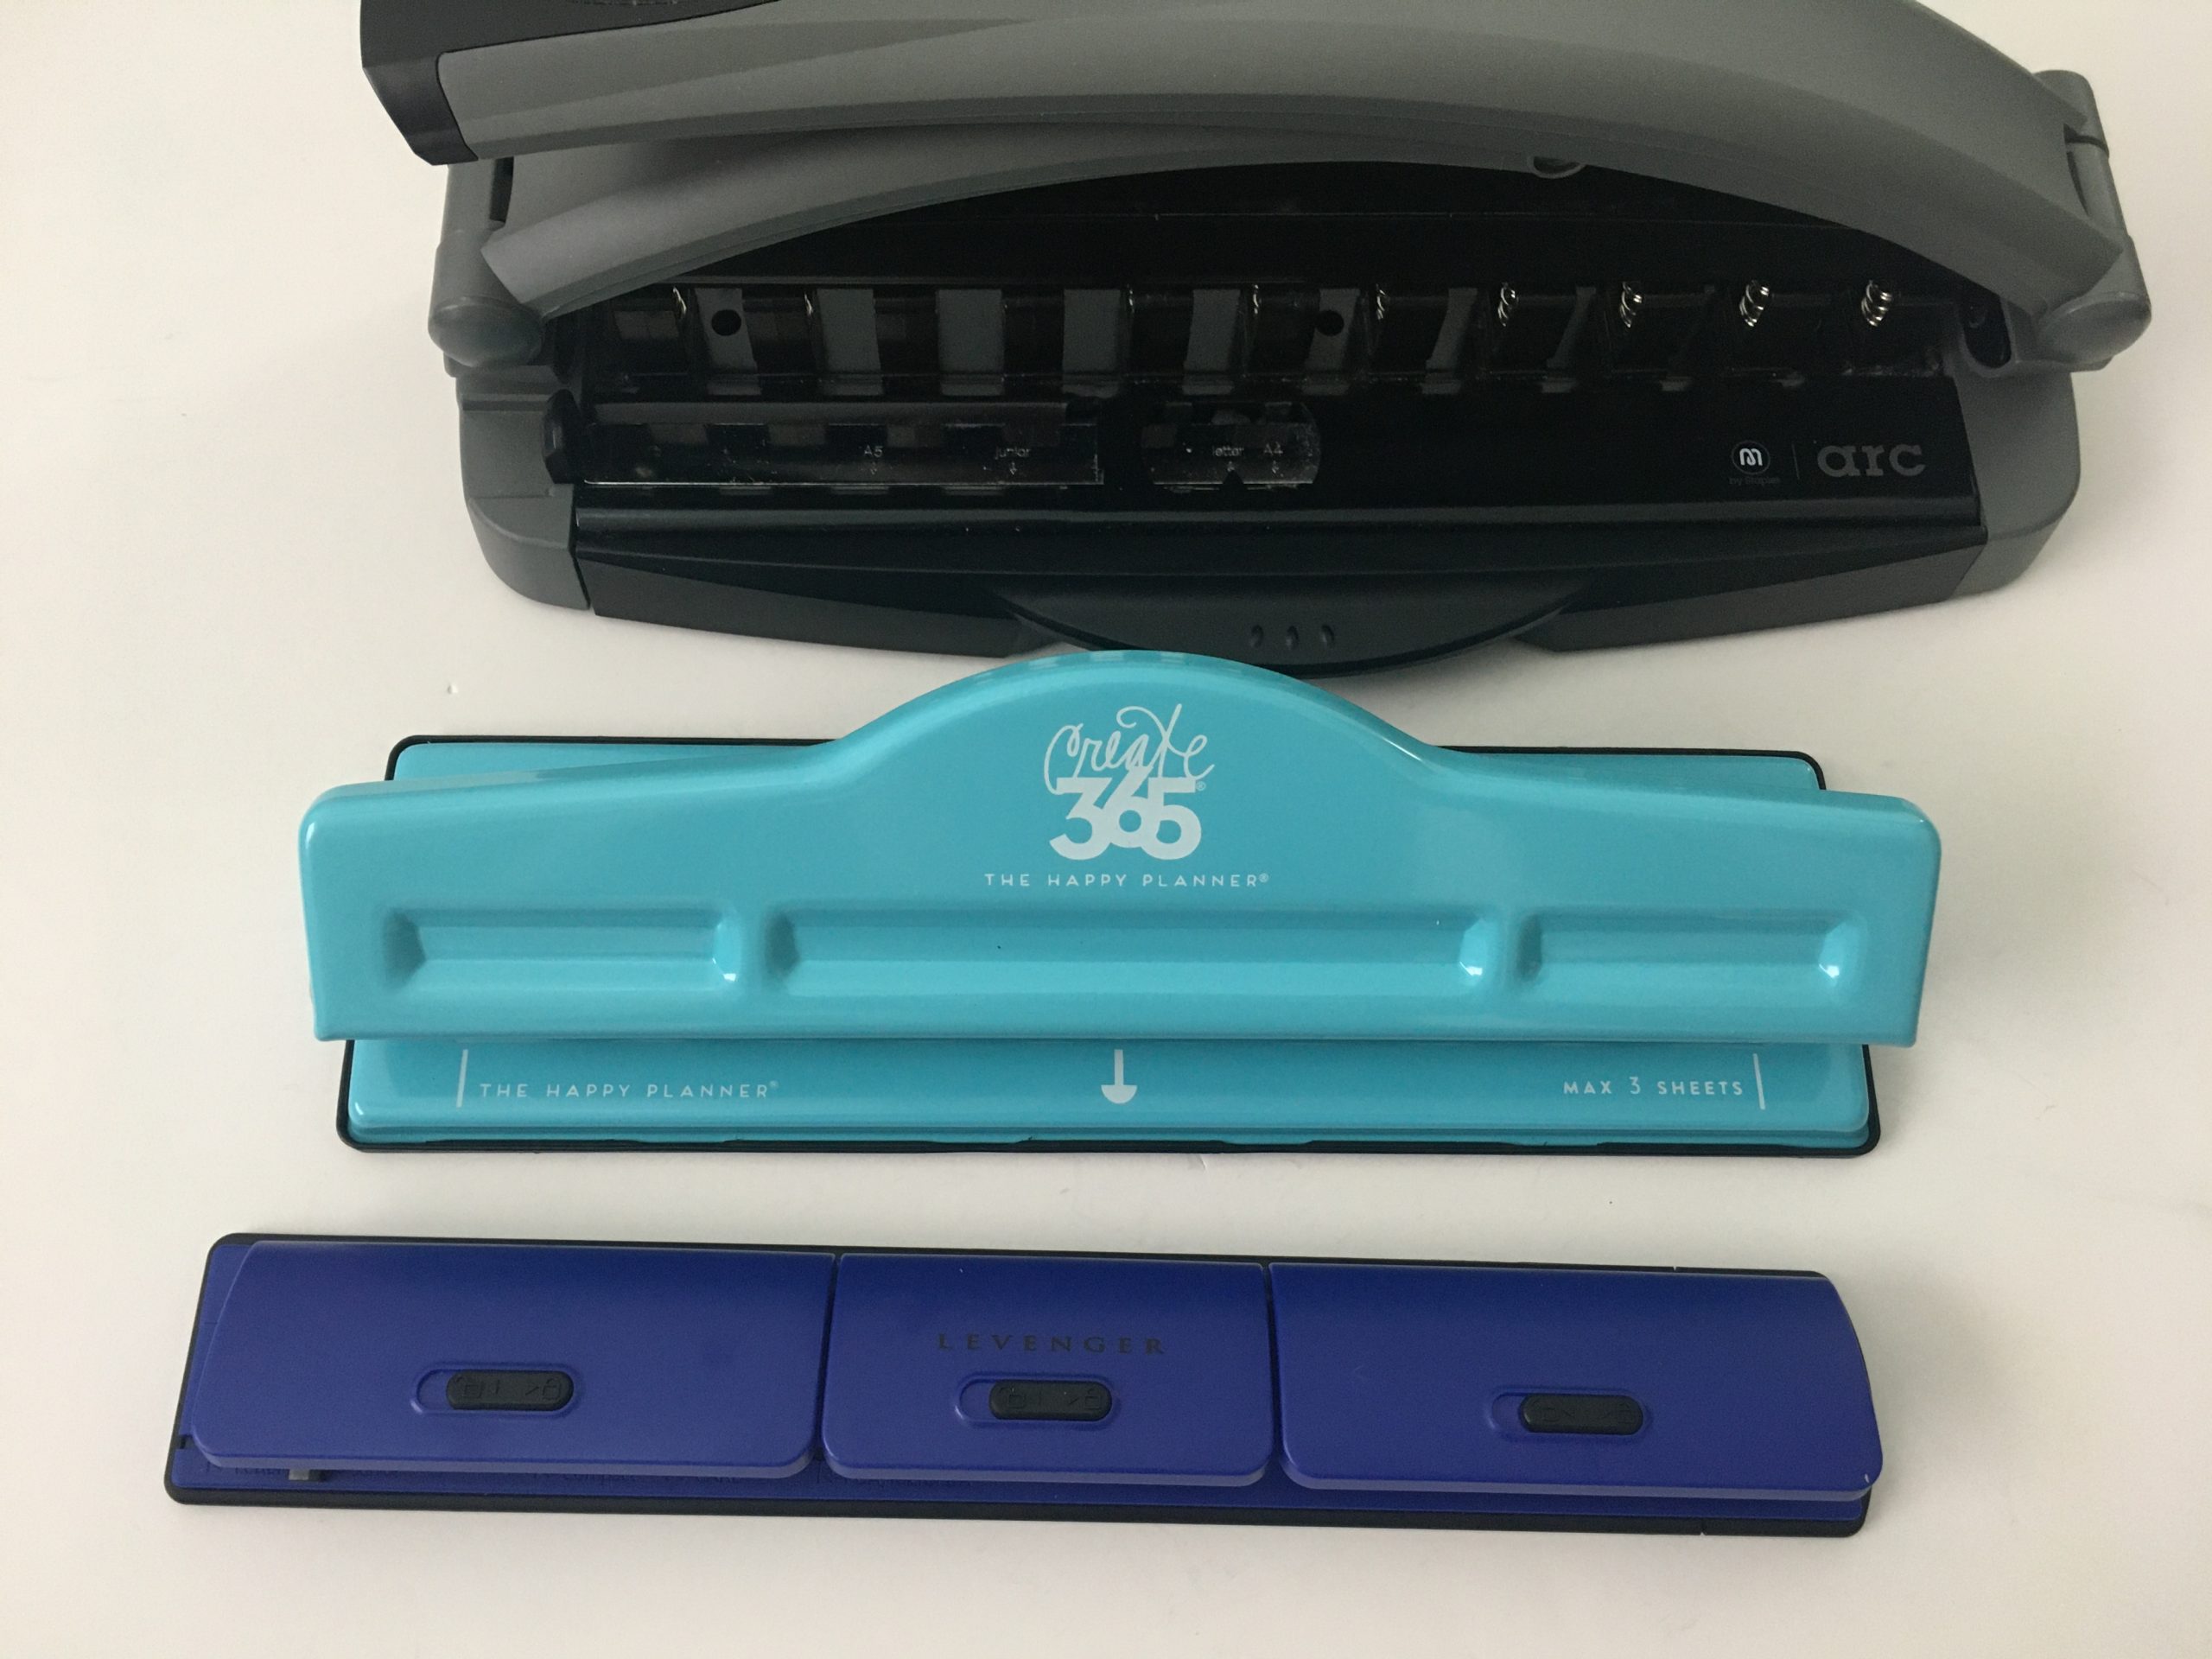 Arc punch review – best hole punch for discbound planning? Disc hole punch